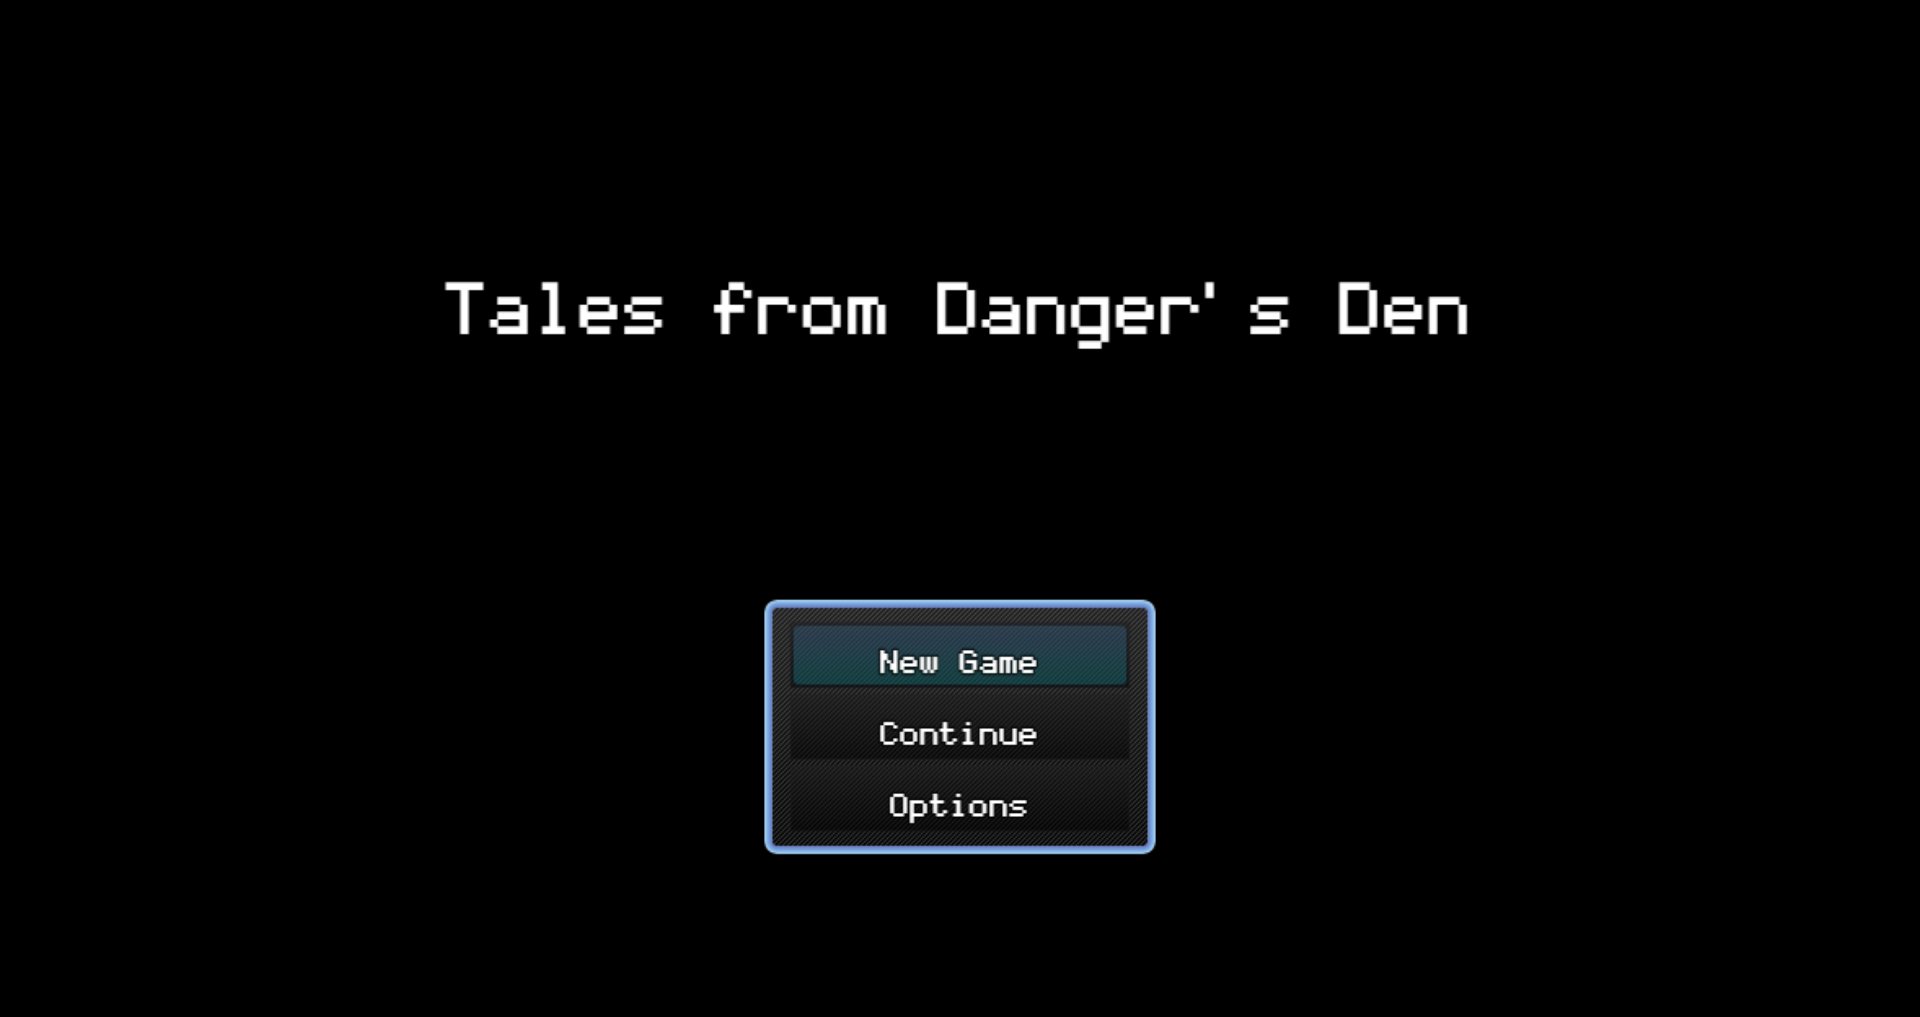 On a plain black screen, the game's title, "Tales from Danger's Den" is centered at the top in a simple pixel font. Below it in a transparent gray window with a white rim, is a selectable list of three options: New Game, Continue, and Options.